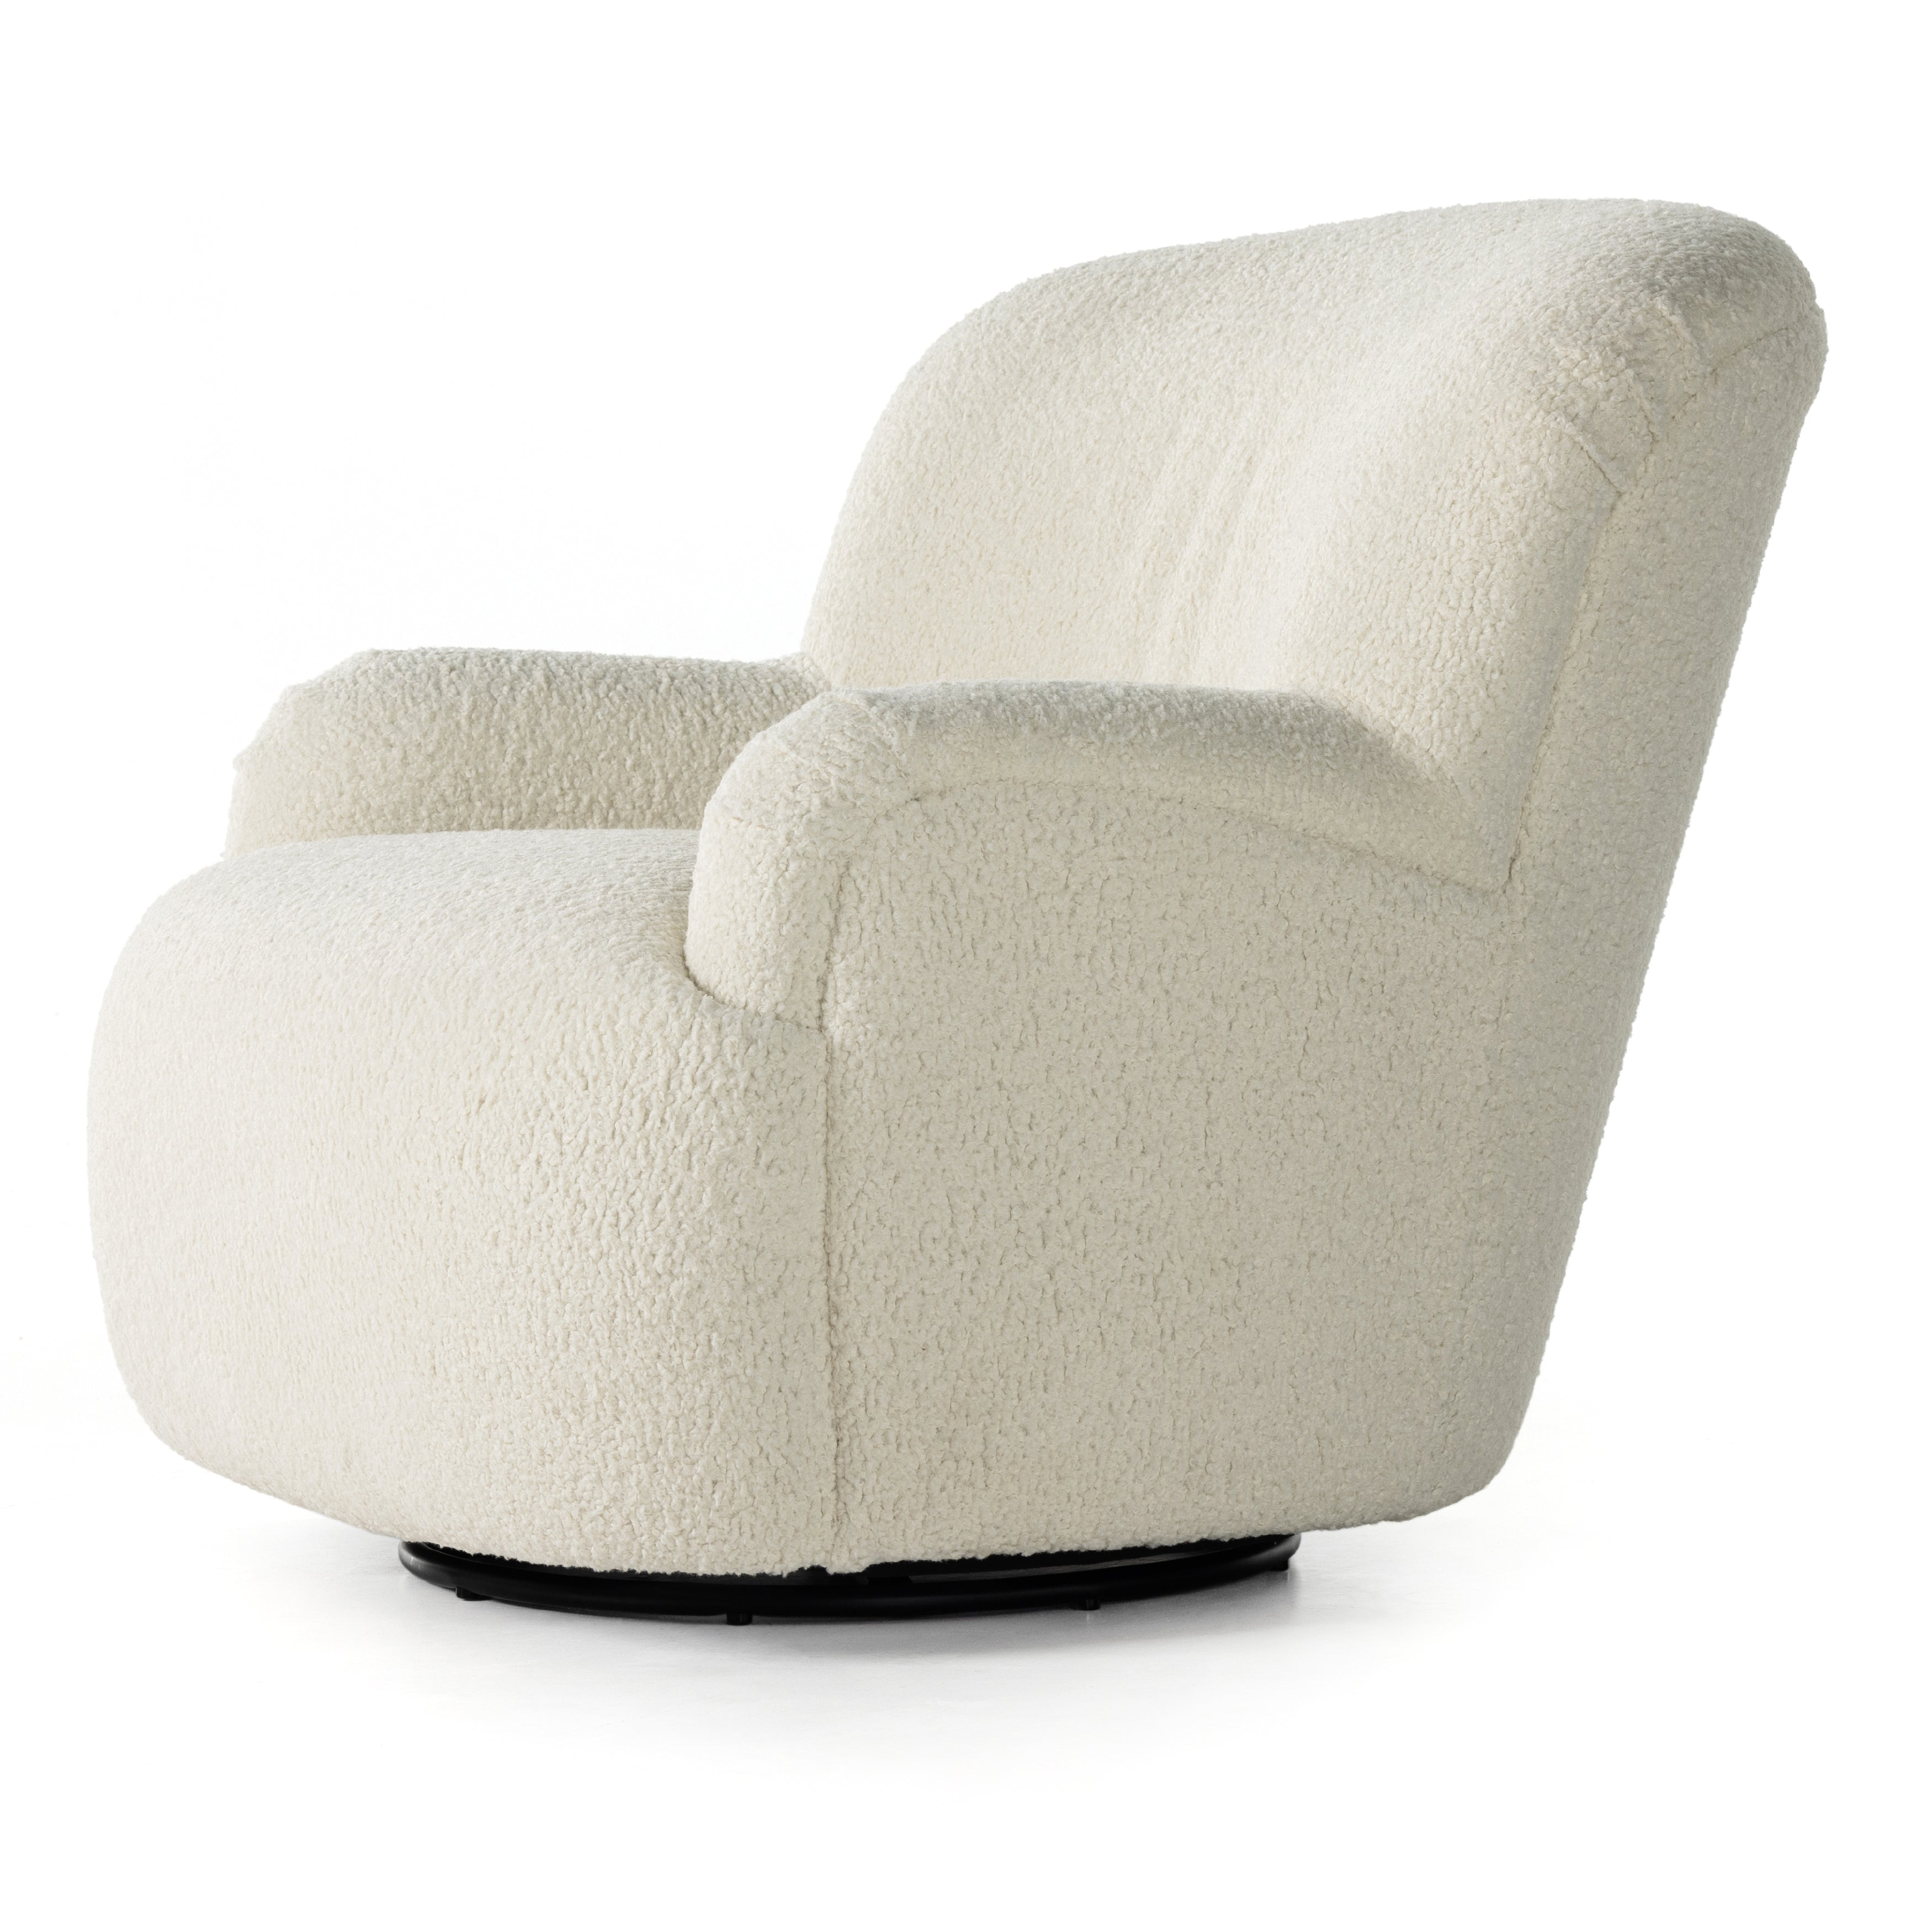 Kadon Natural Swivel Chair is a high wing back pairs with softly rolled arms for a curvy look and supportive sit. Cream-colored shearling-upholstered seating tops a 360-degree swivel. Amethyst Home provides interior design services, furniture, rugs, and lighting in the Omaha metro area.